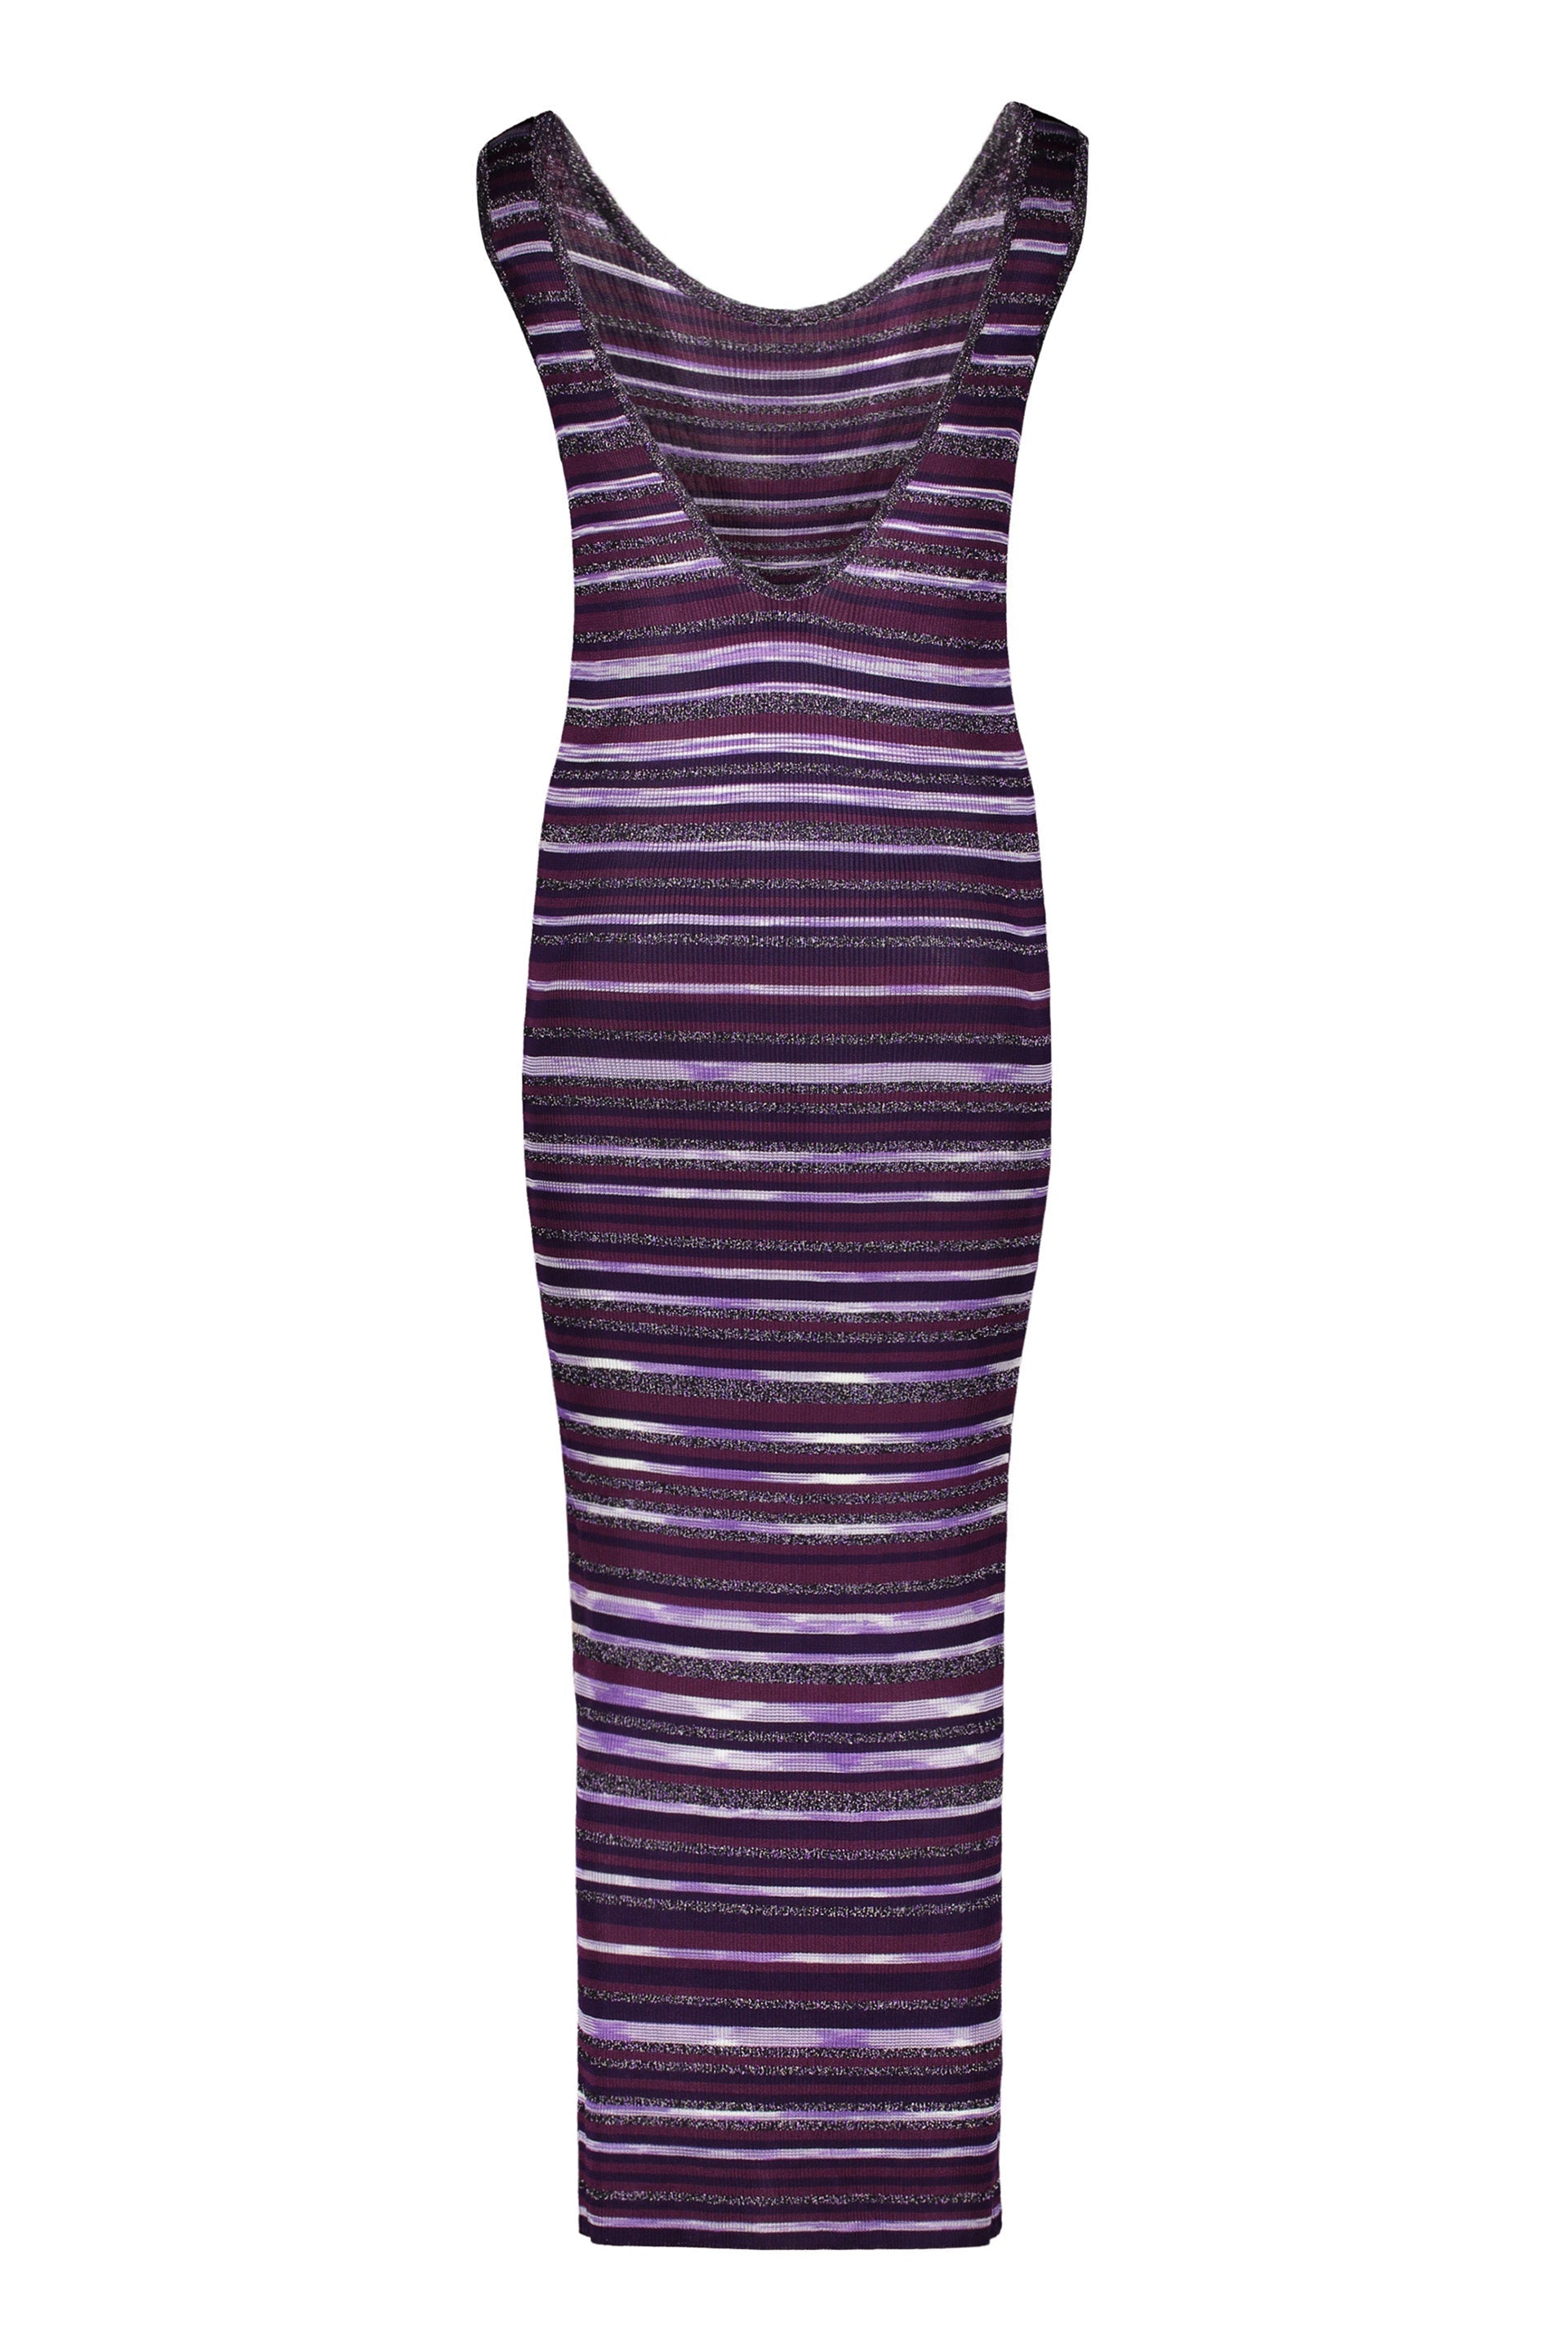 Missoni-OUTLET-SALE-Knitted-dress-Kleider-Rocke-ARCHIVE-COLLECTION-2_3a4feb30-d536-49c4-9515-48f14a86523f.jpg